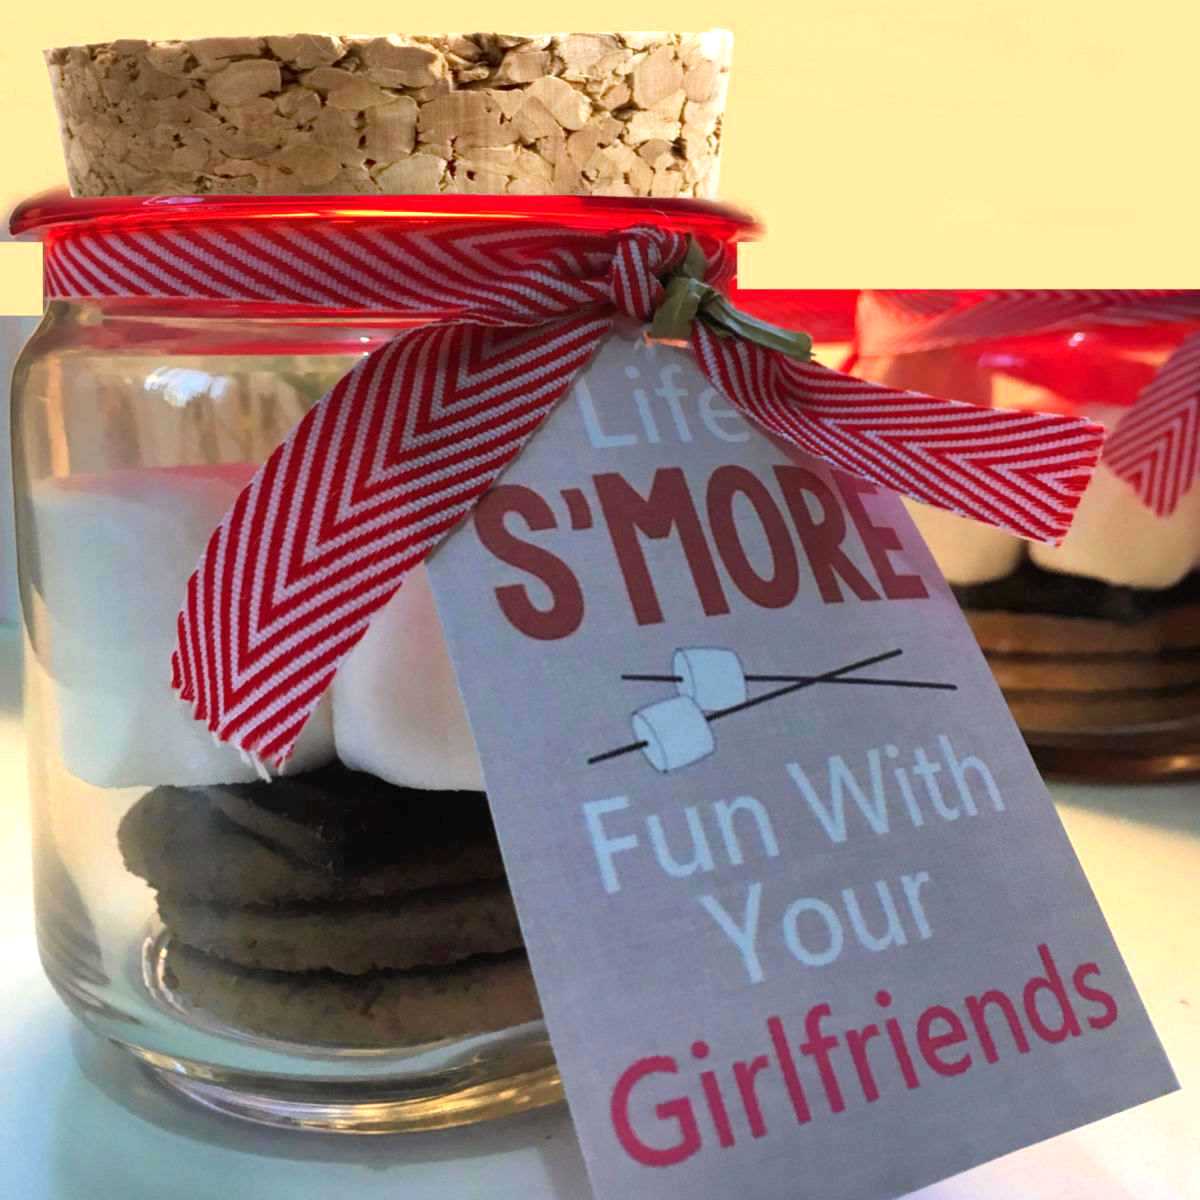 Jar with a cork and gift card, and s'mores ingredients.